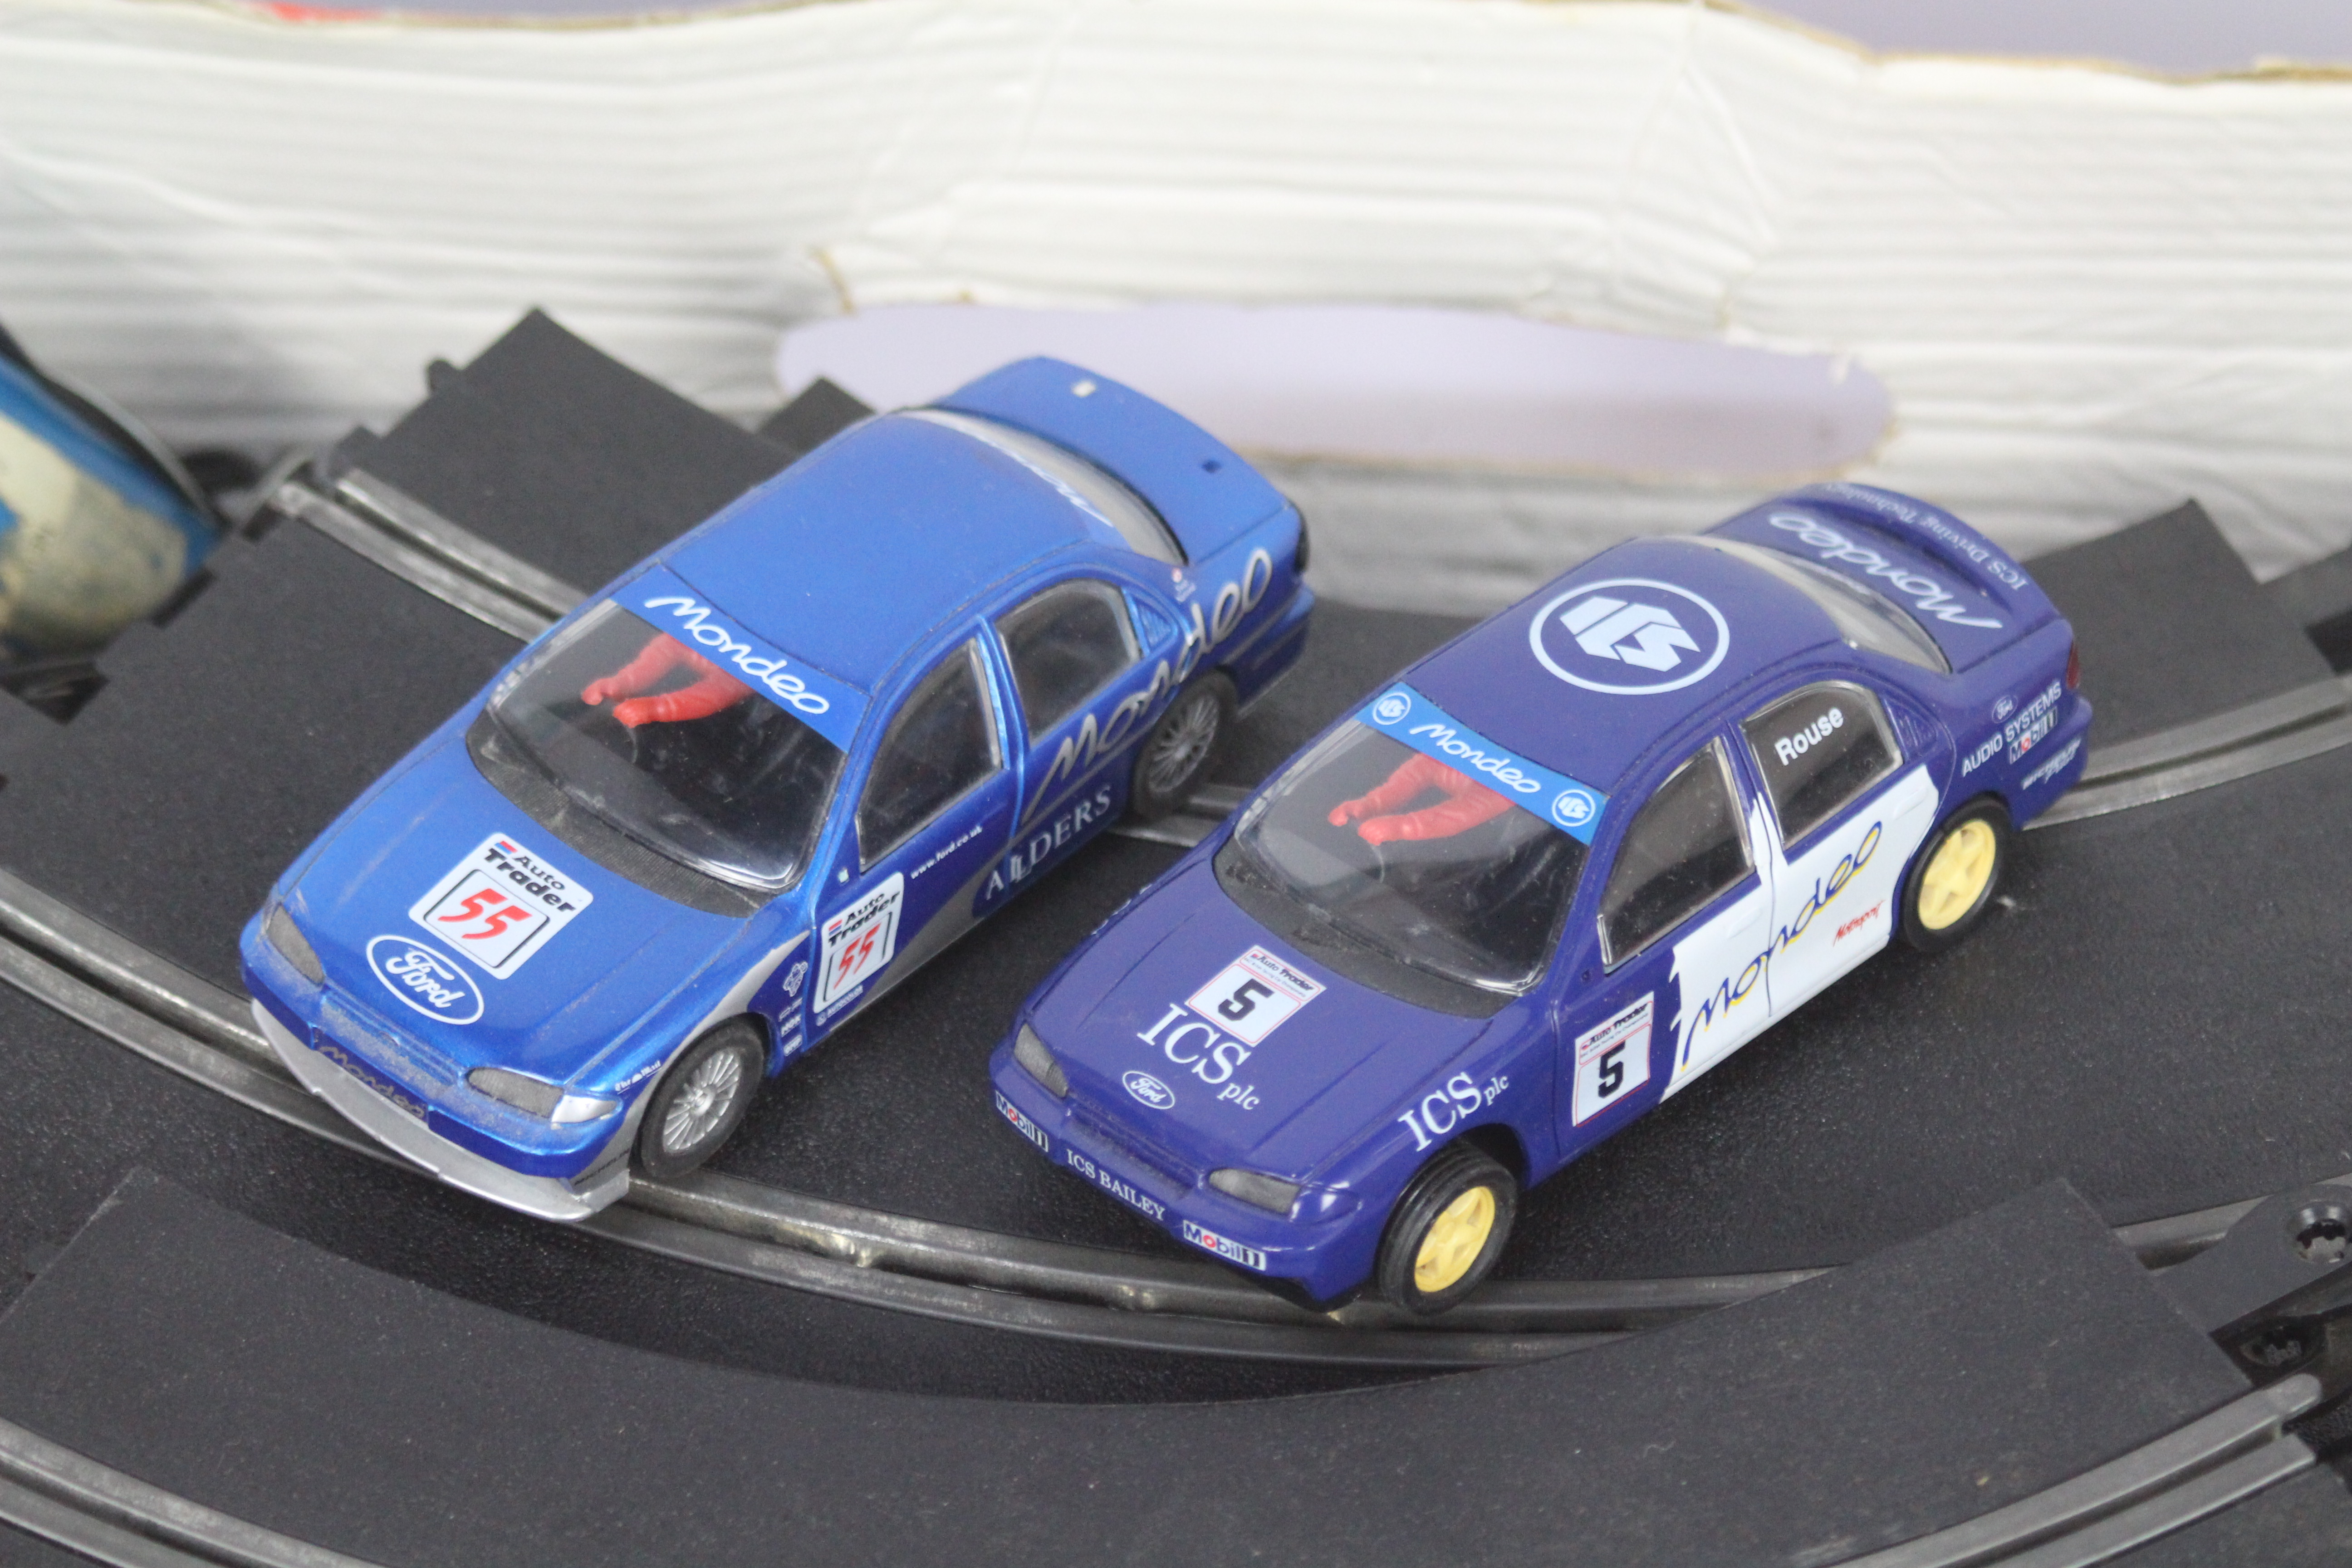 Scalextric - 2 x boxed sets # C805 Eurocars and # C650 Banger Raceway. - Image 5 of 5